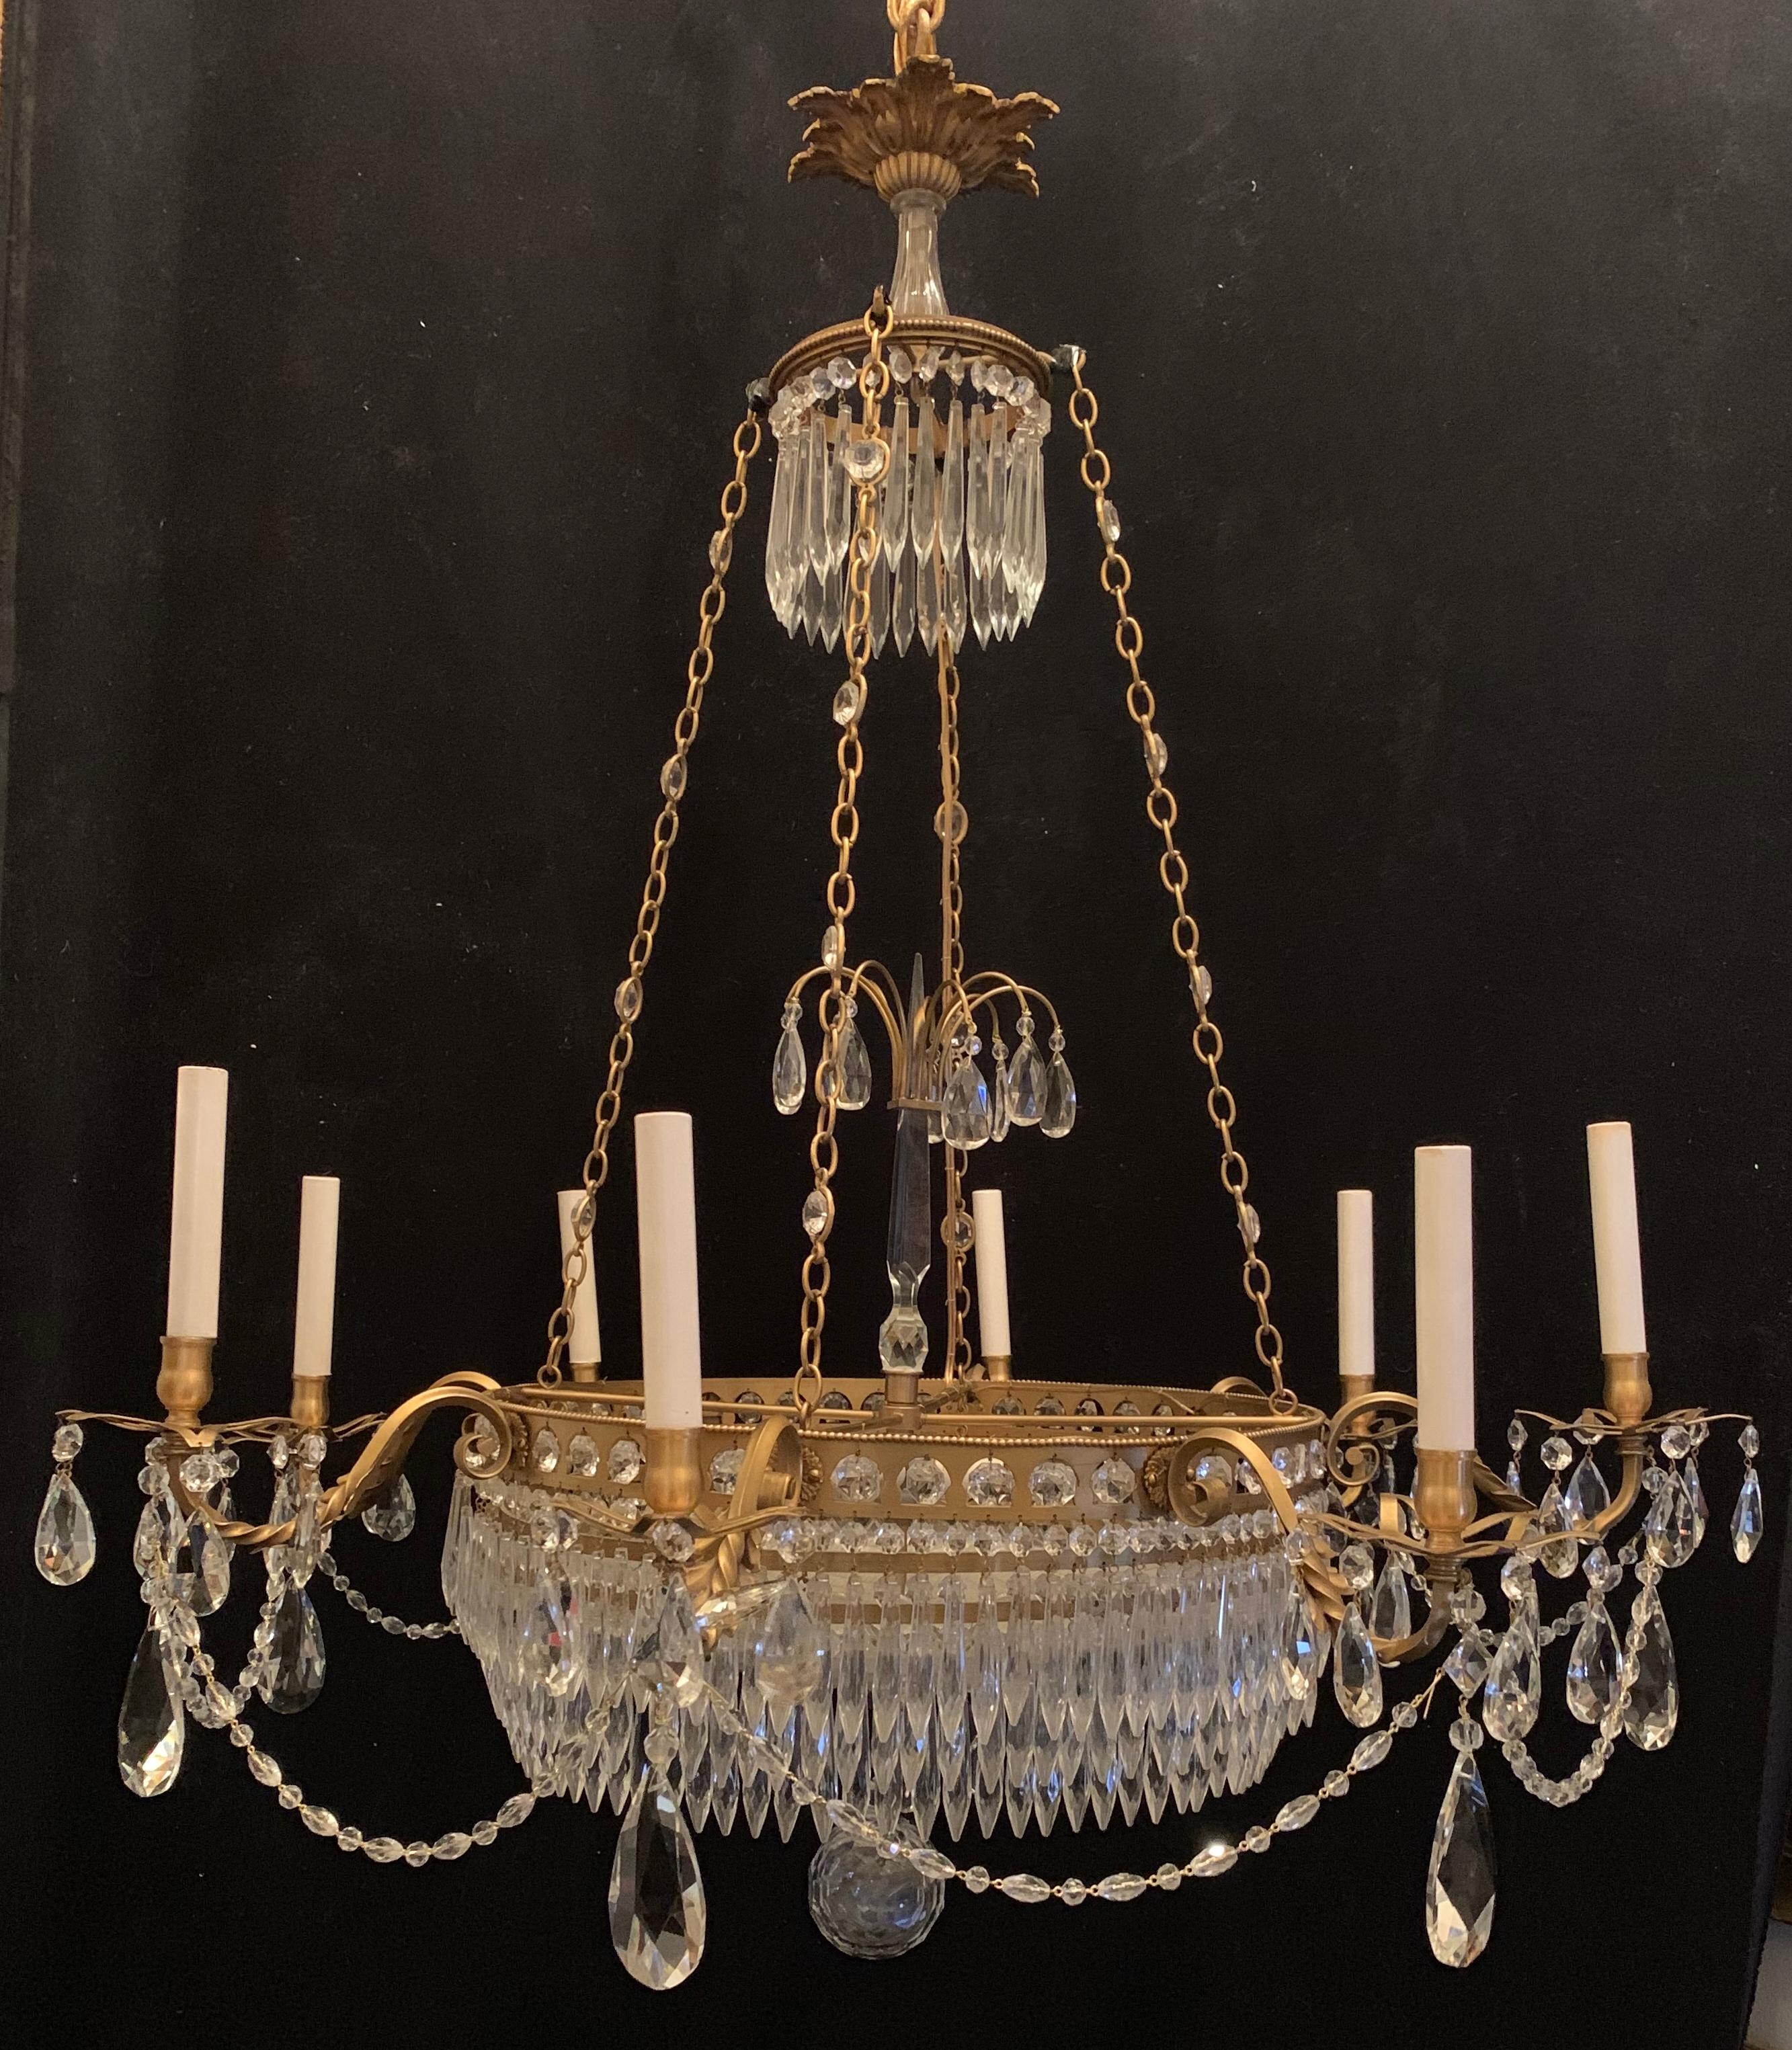 An exceptional French Regency gilt bronze and cut crystal center bowl Empire / Baltic eight-arm chandelier dressed with 3 tiers of crystal drops and crystal swags draping from the bobeches that are mounted to a pierced gallery rim fitted with